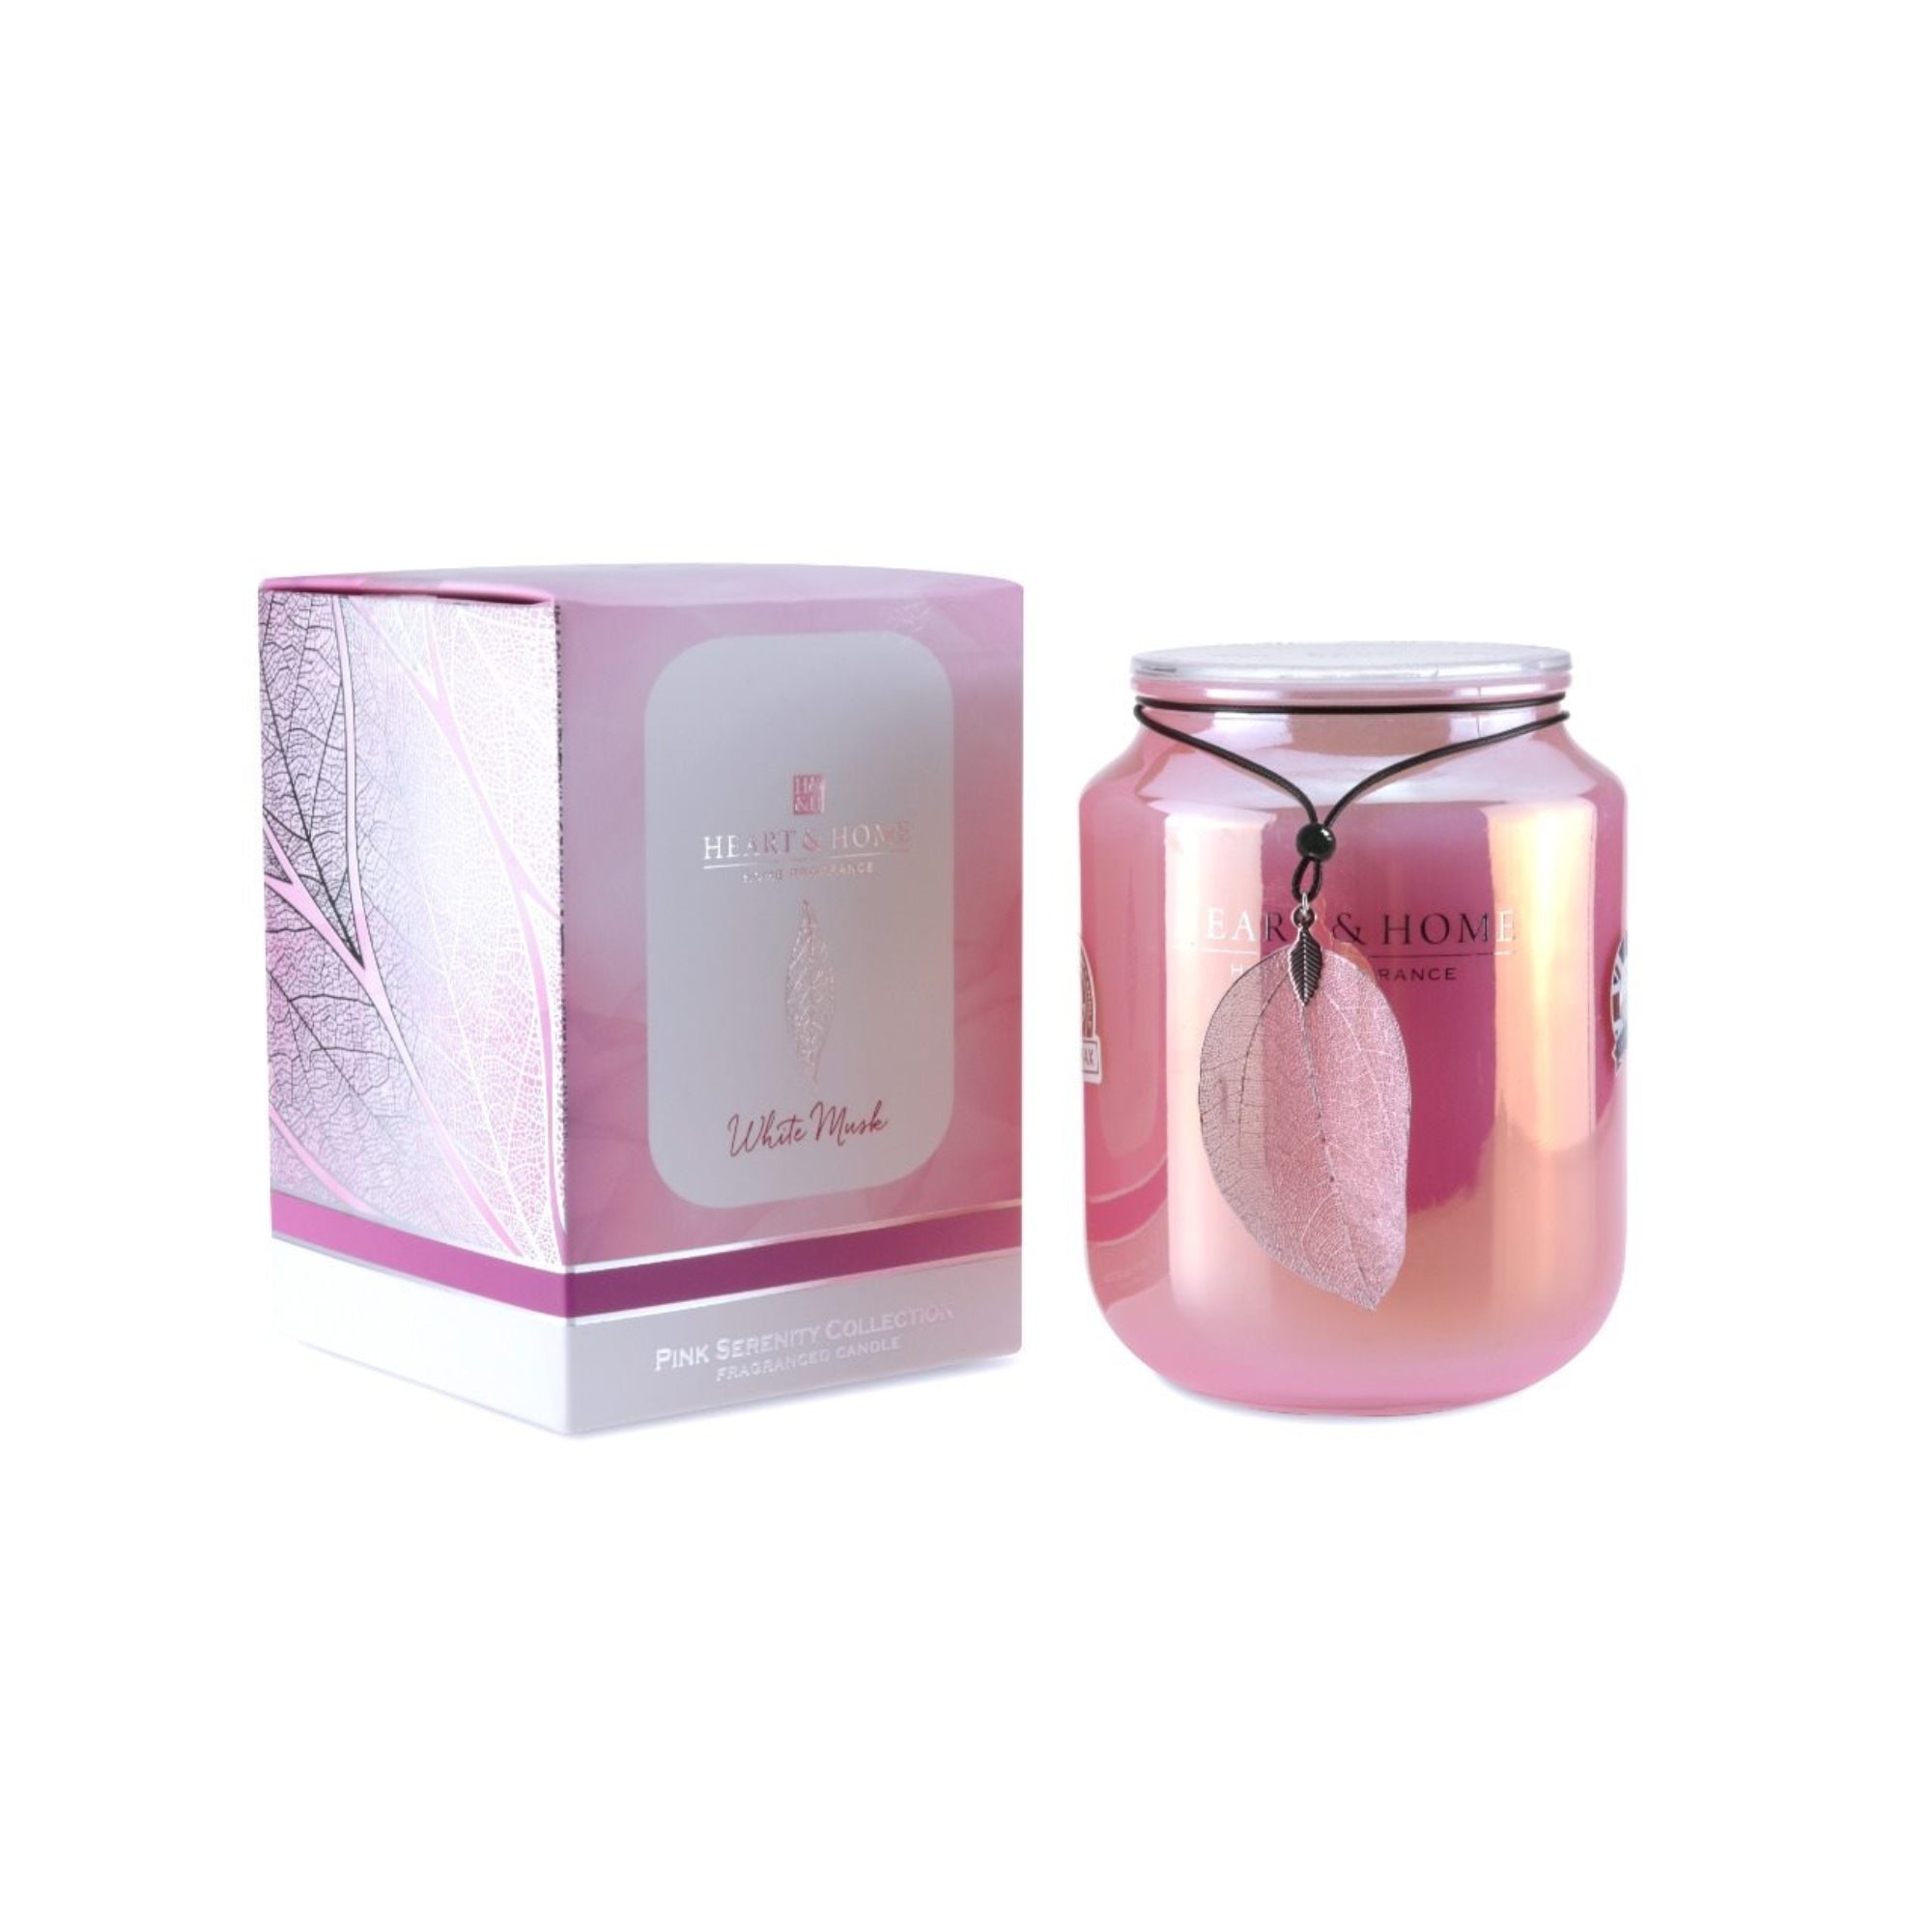 H&H White and Musk Jar Candle